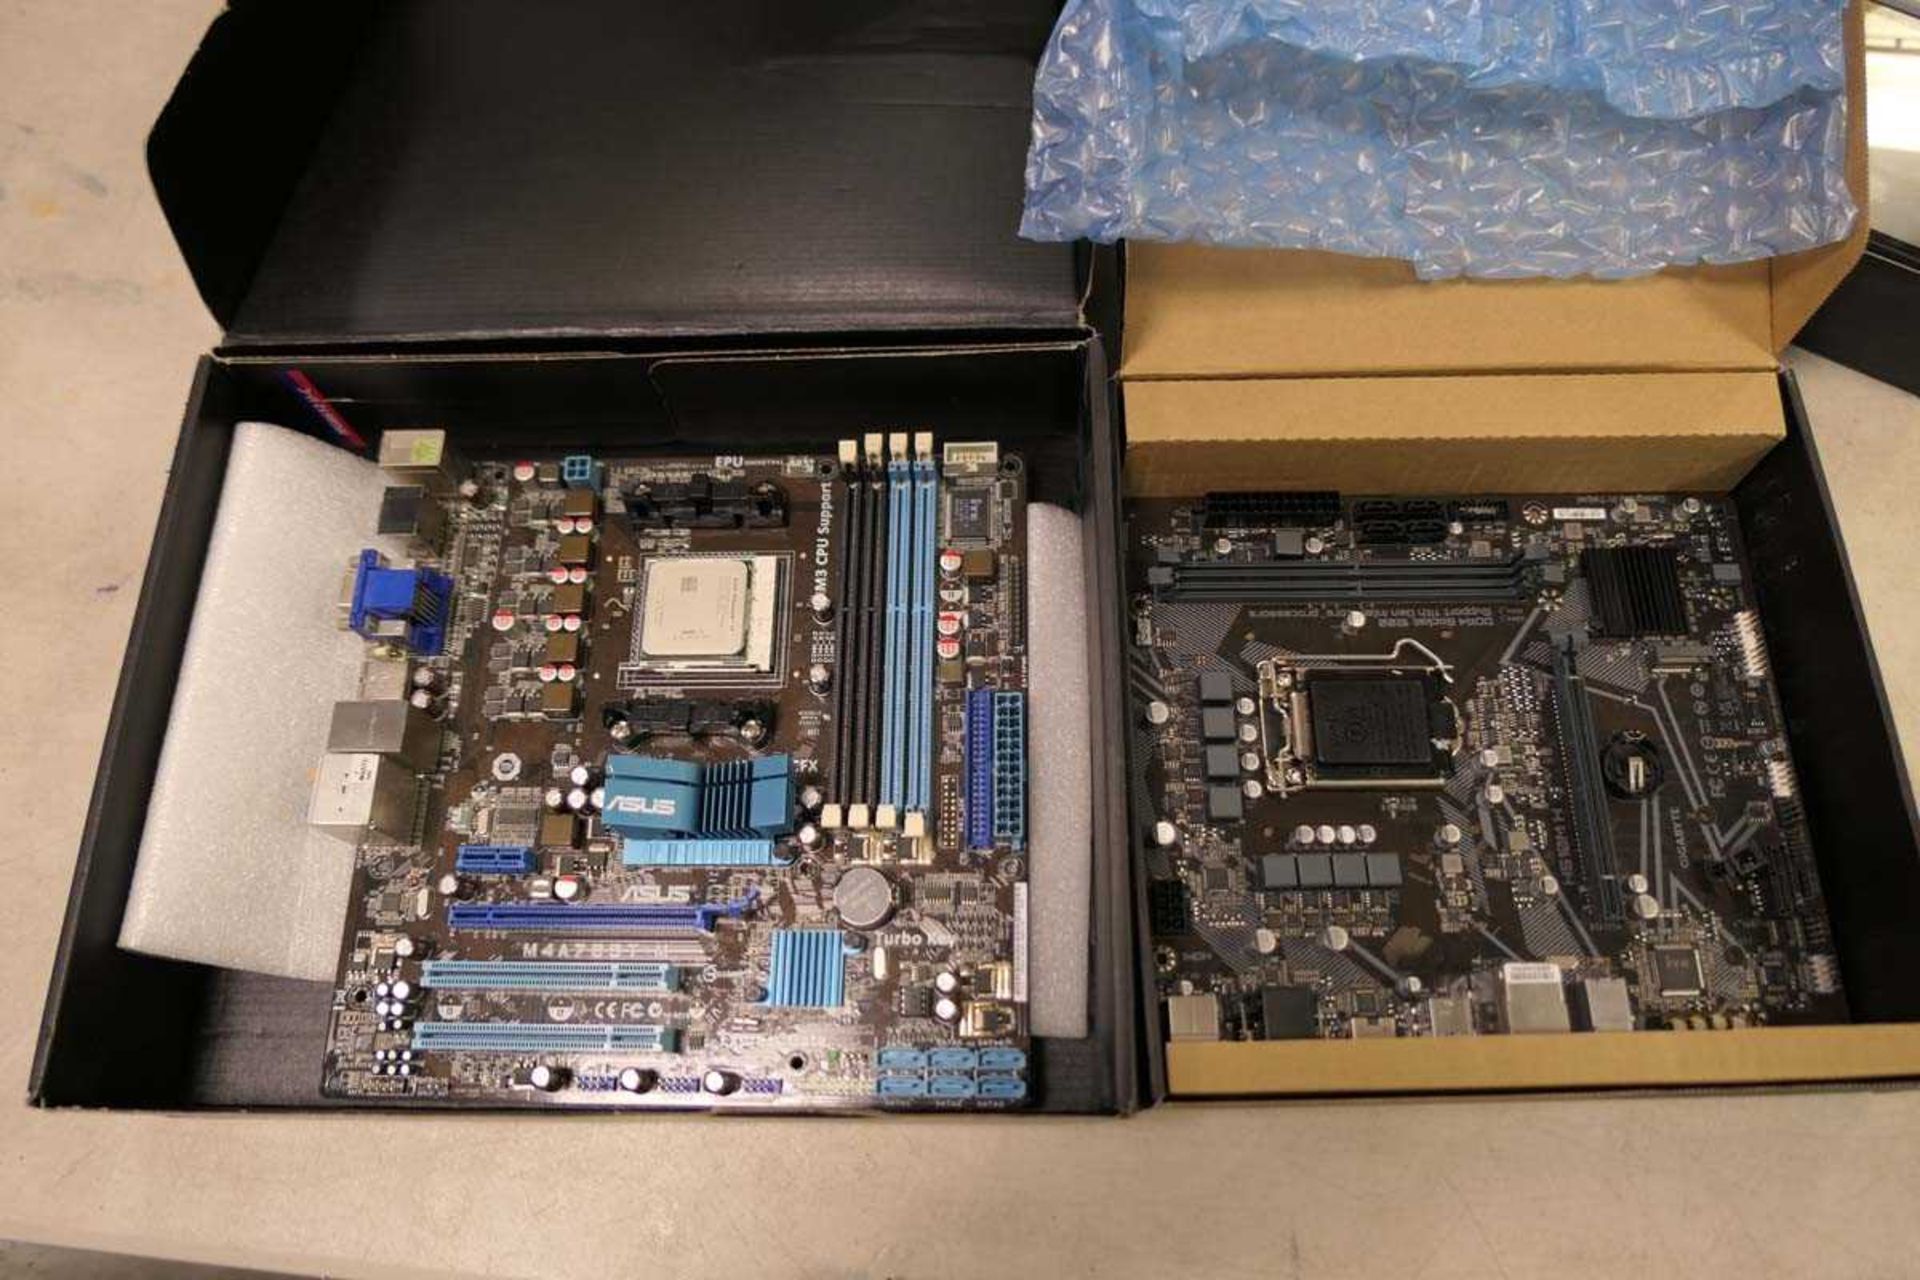 2 motherboards (incorrect boxes)